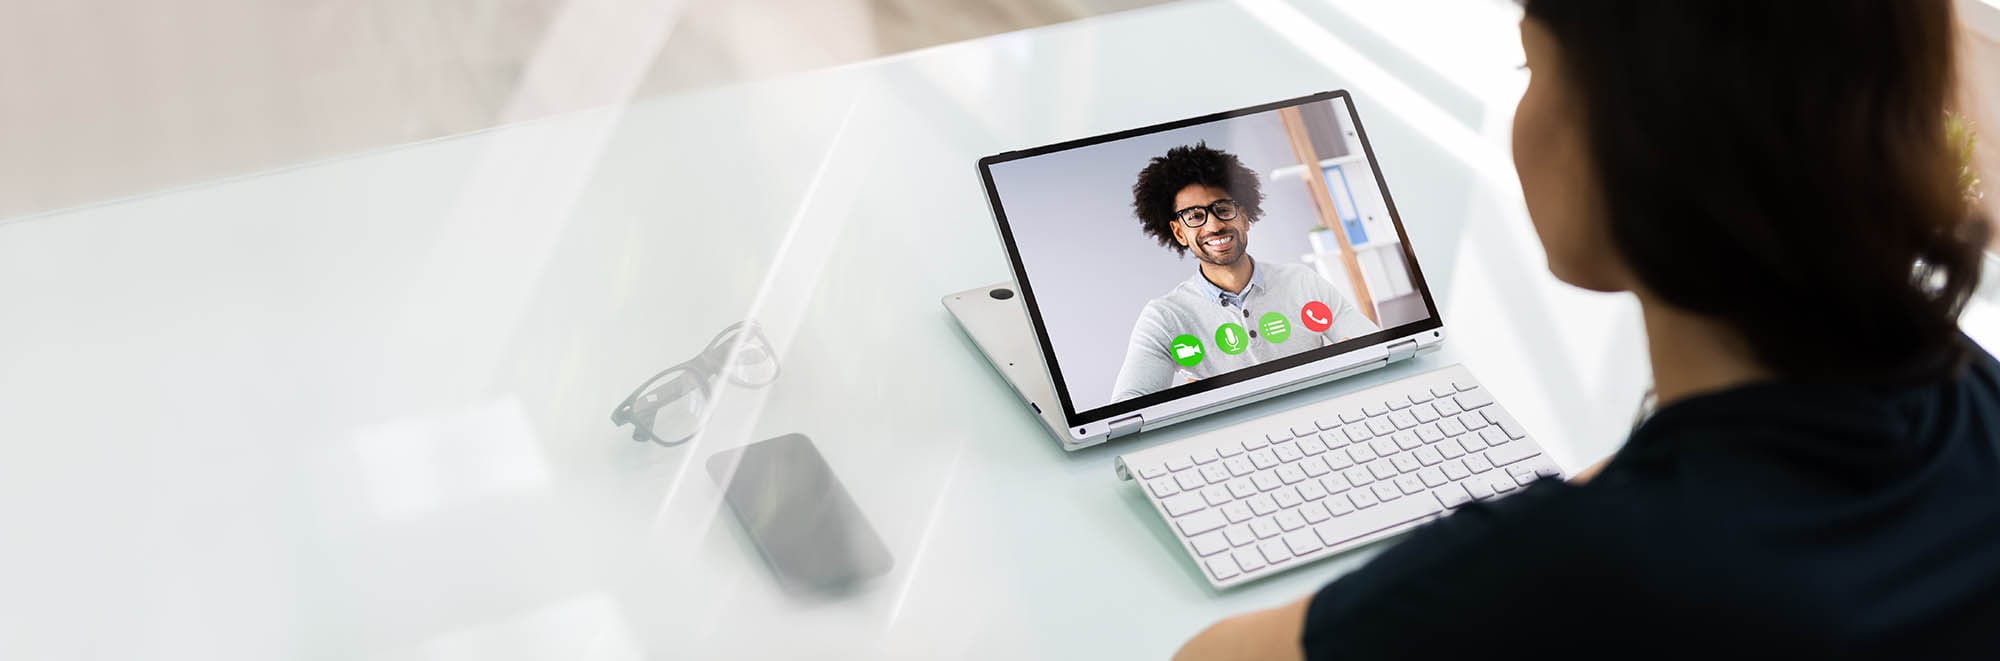 Best Practices For Conducting Virtual Interviews